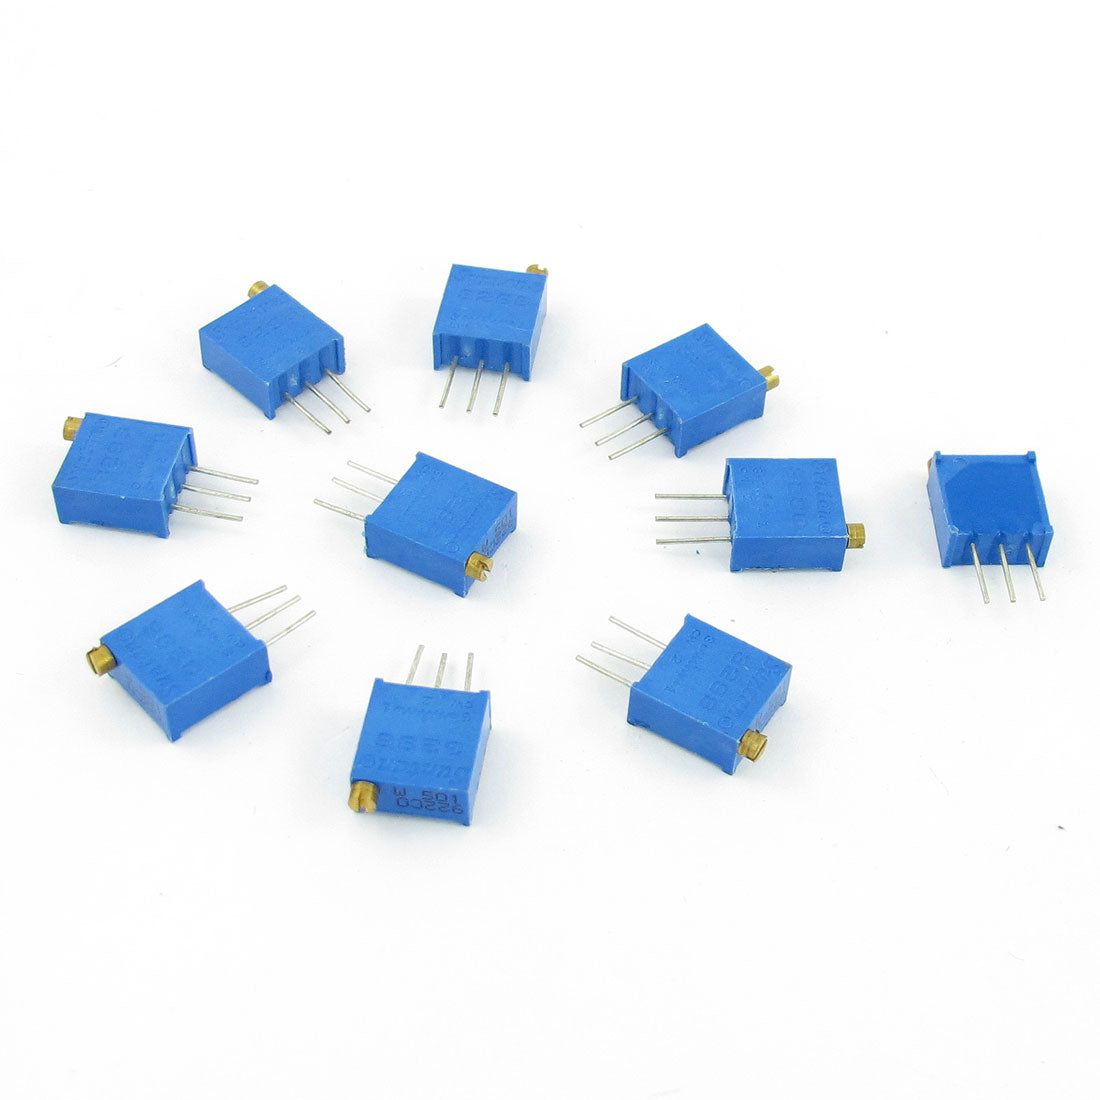 uxcell Uxcell 10 Pcs 3296W-501 0.5W 500 ohm 3 Pin Cermet Potentiometer Variable Resistors